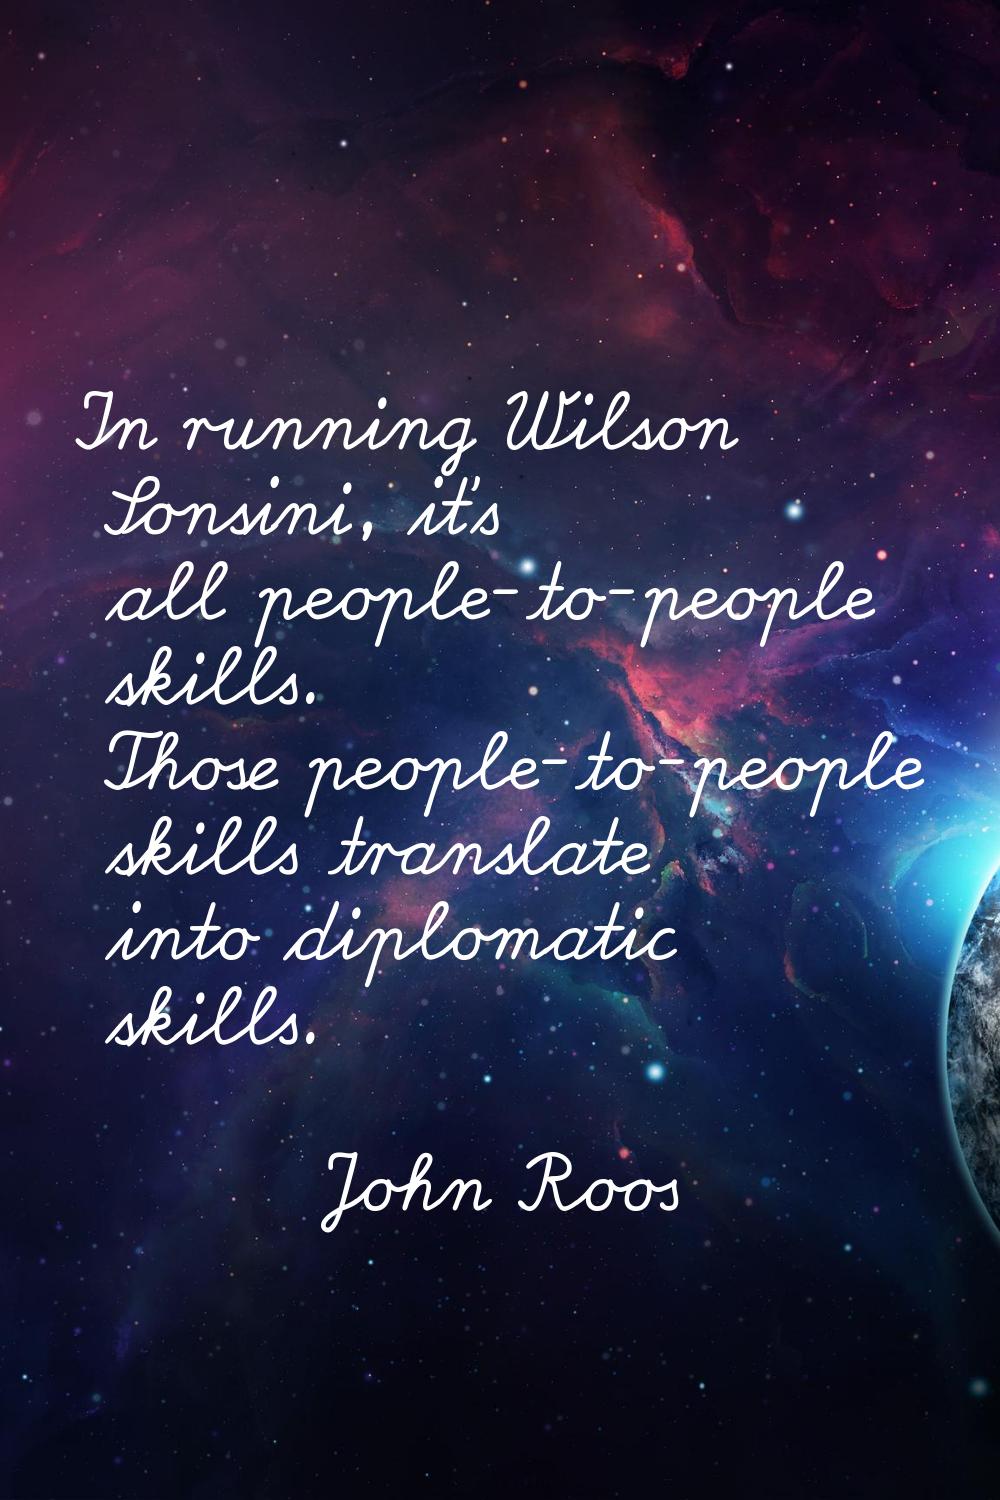 In running Wilson Sonsini, it's all people-to-people skills. Those people-to-people skills translat